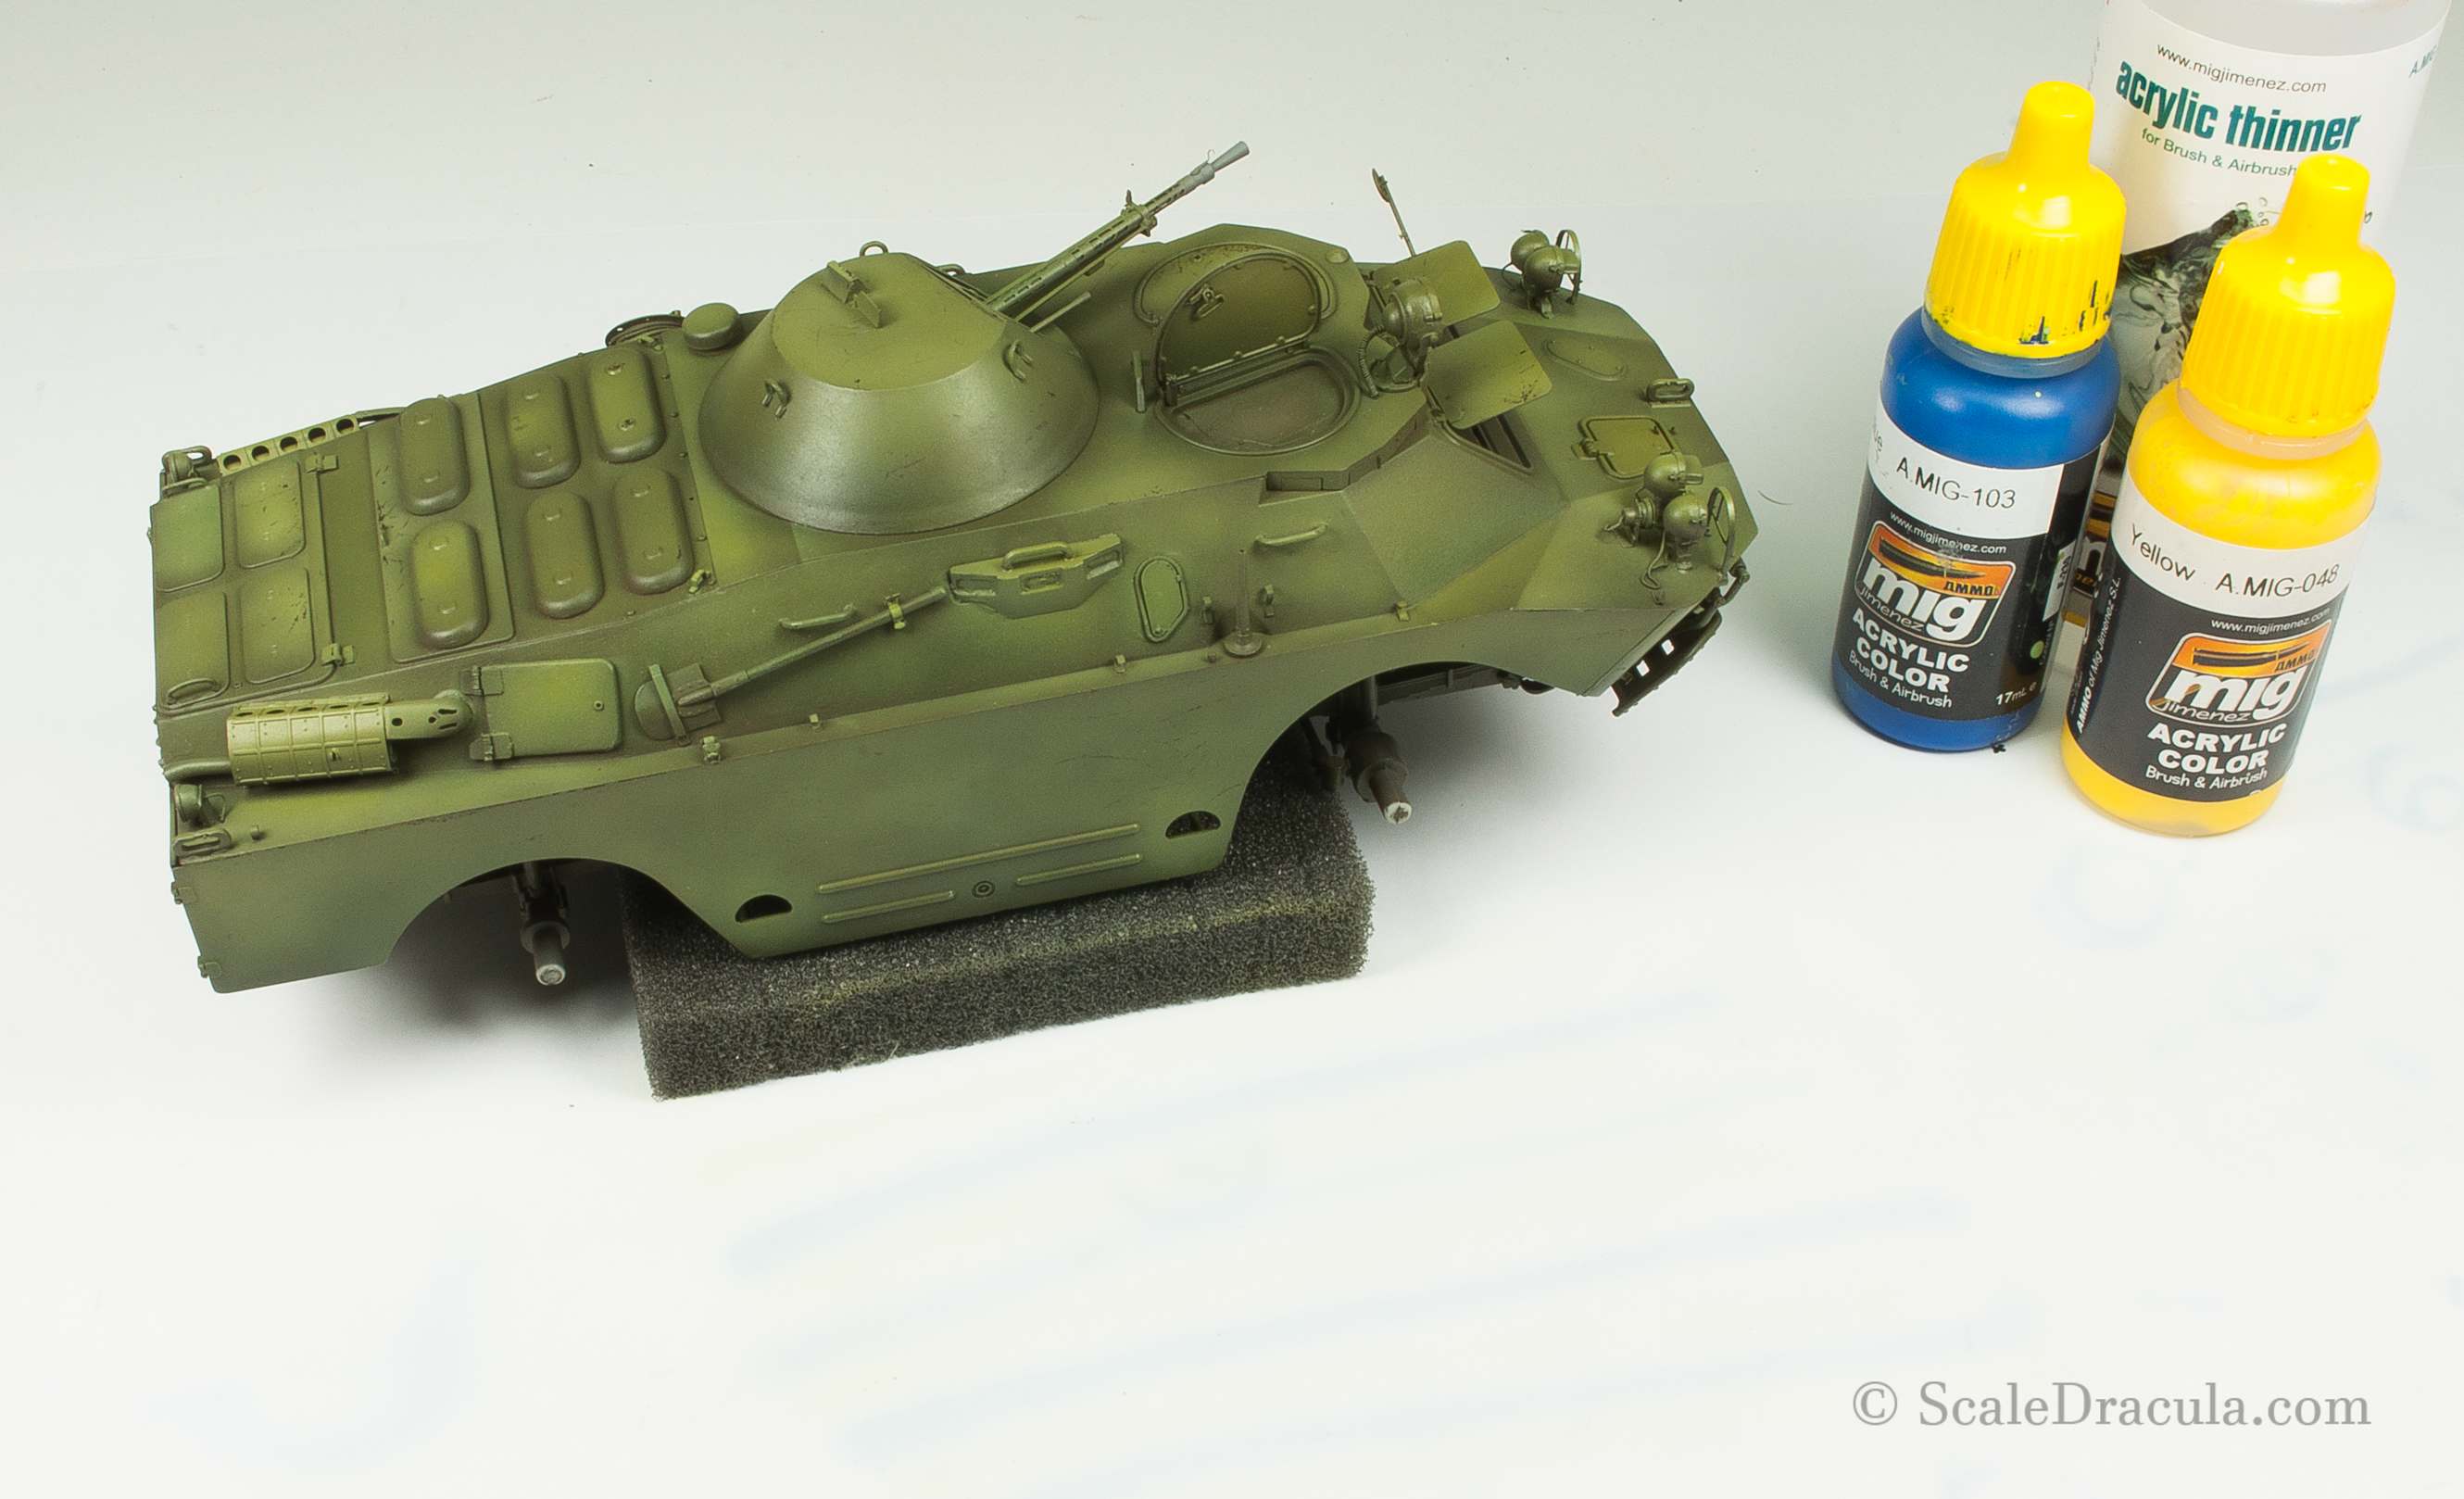 Filters applied with airbrush, BRDM-2 by Trumpeter